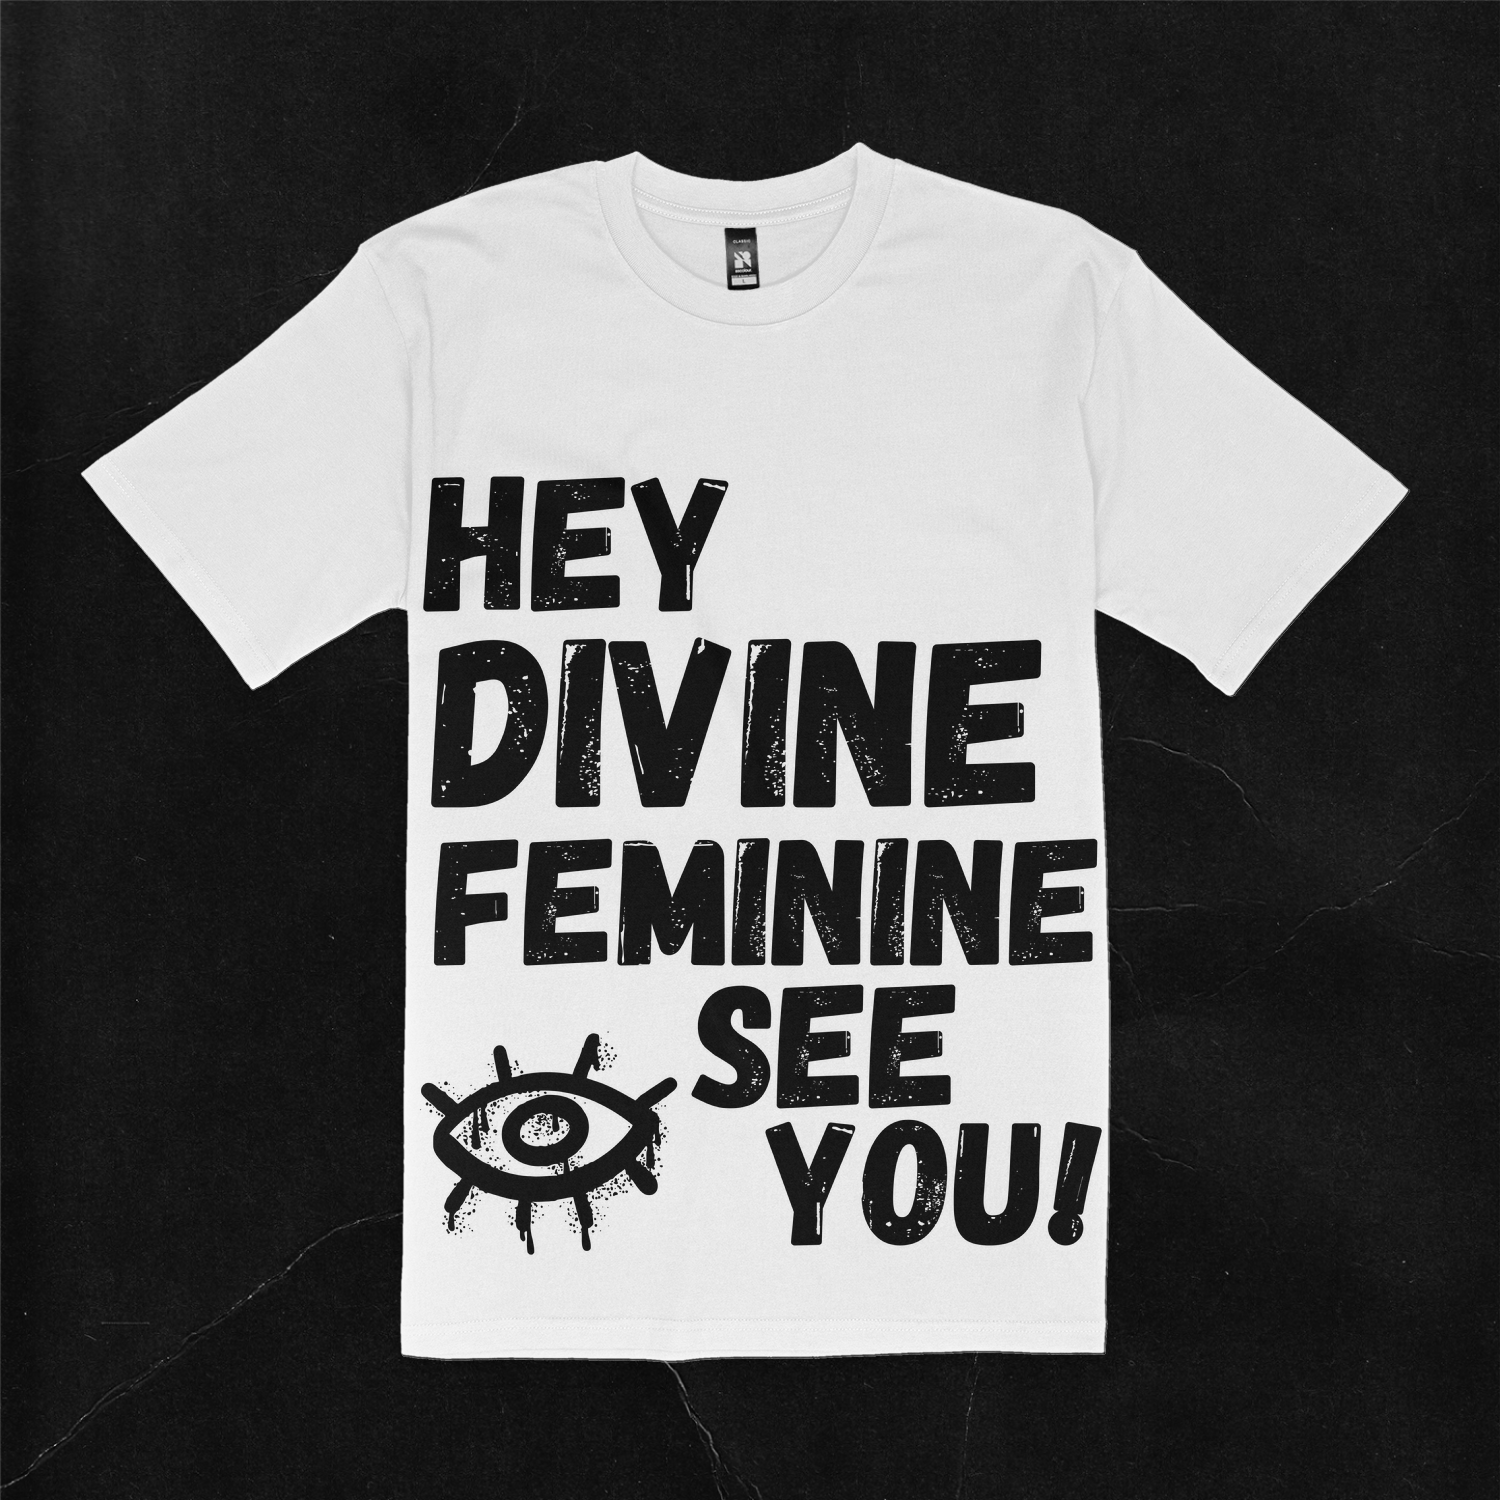  White T-shirt with the text "HEY DEVINE FEMININE I (a picture of an eye) SEE YOU"  written in black